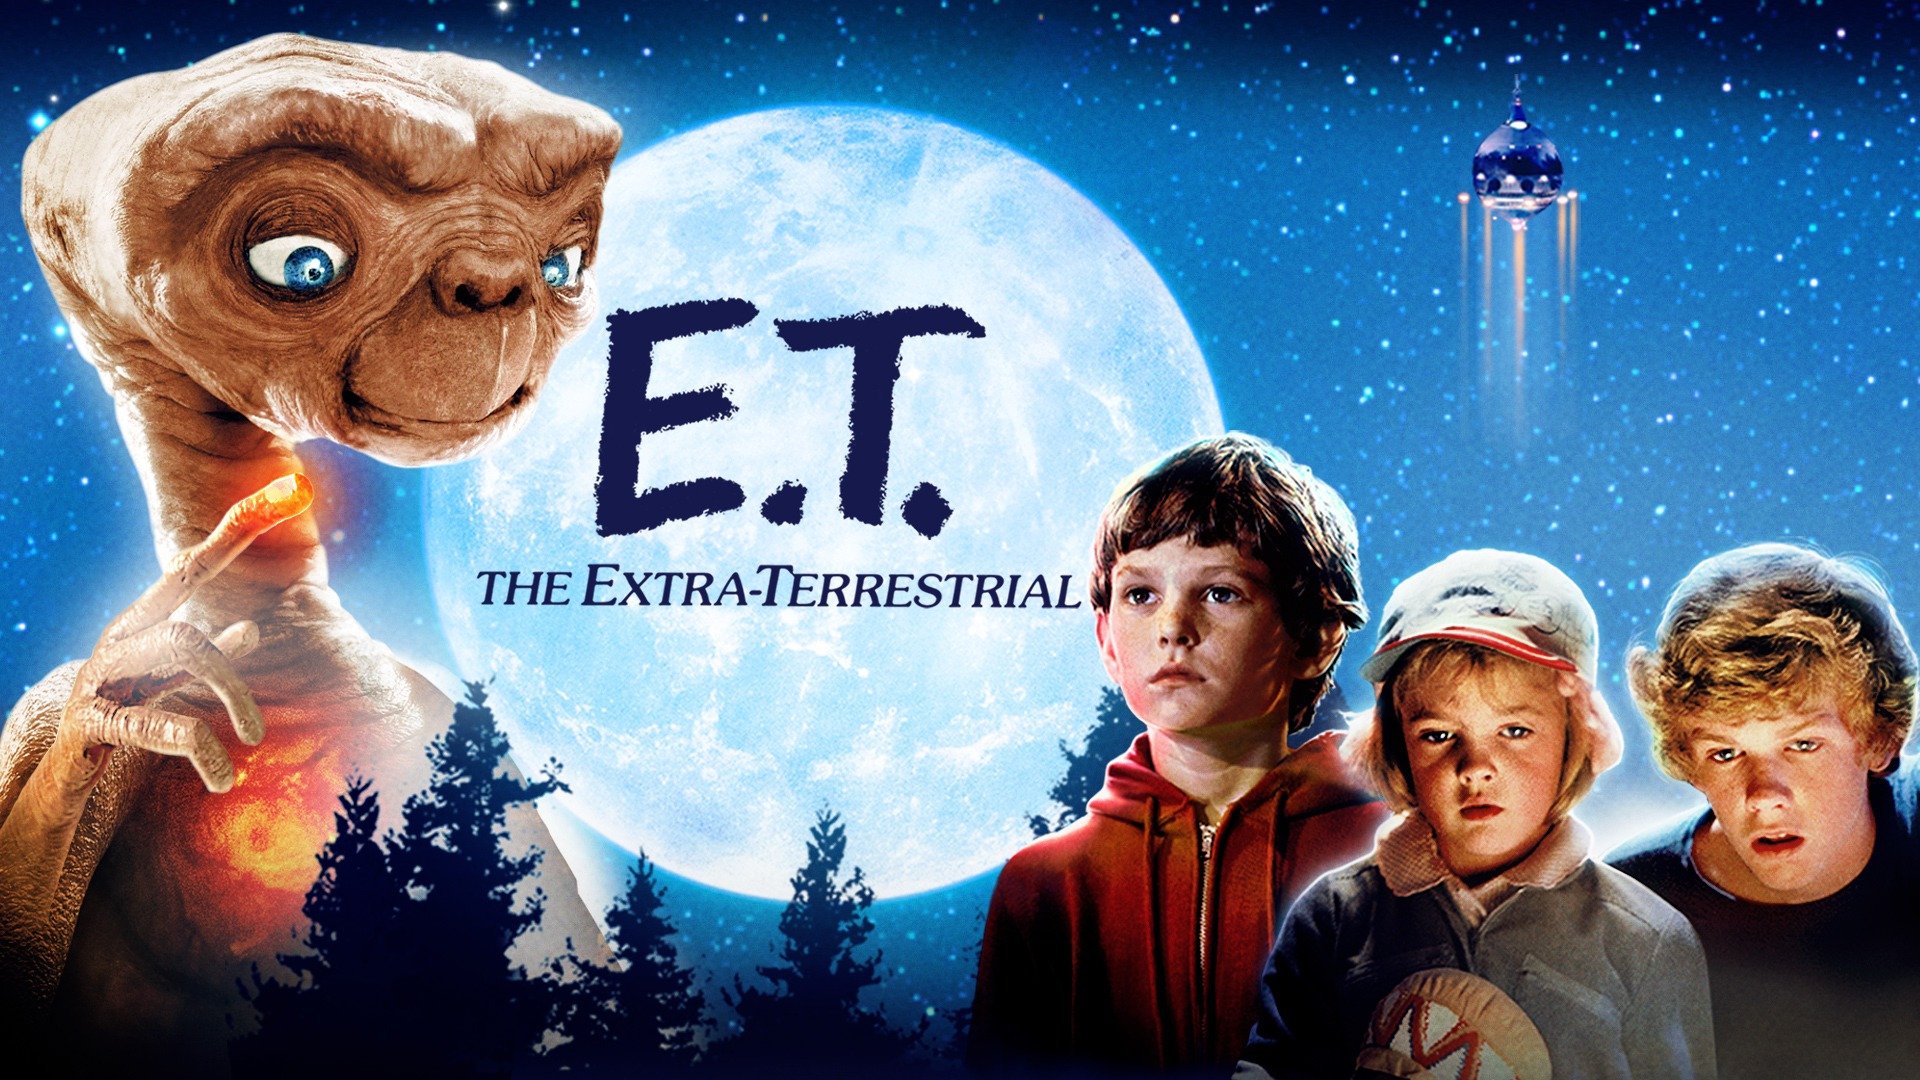 38-facts-about-the-movie-e-t-the-extra-terrestrial